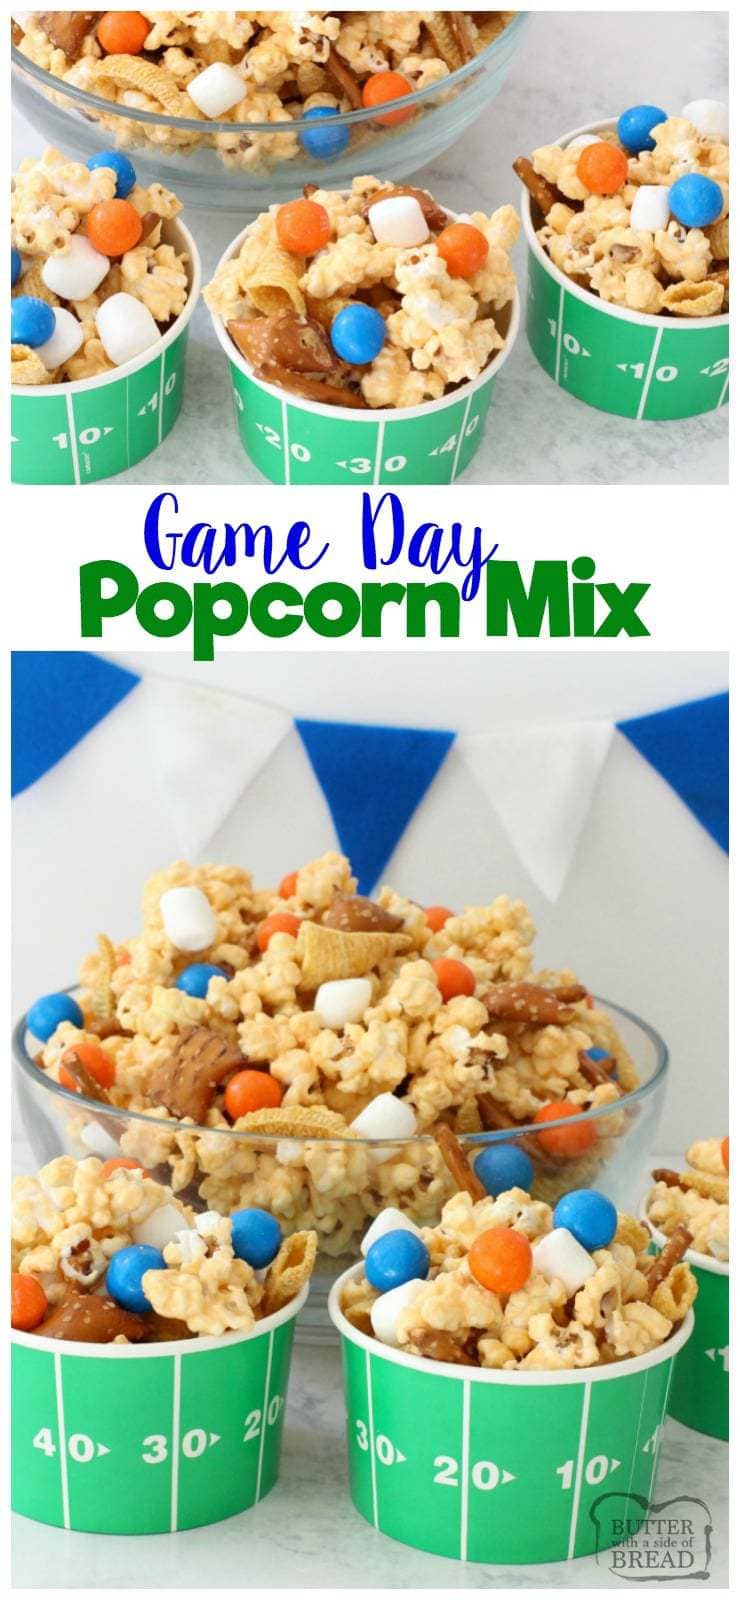 Easy Popcorn Snack Mix is sweet, salty, & perfect for excited sports fans! Customize candy colors to celebrate your team in this snack mix recipe!